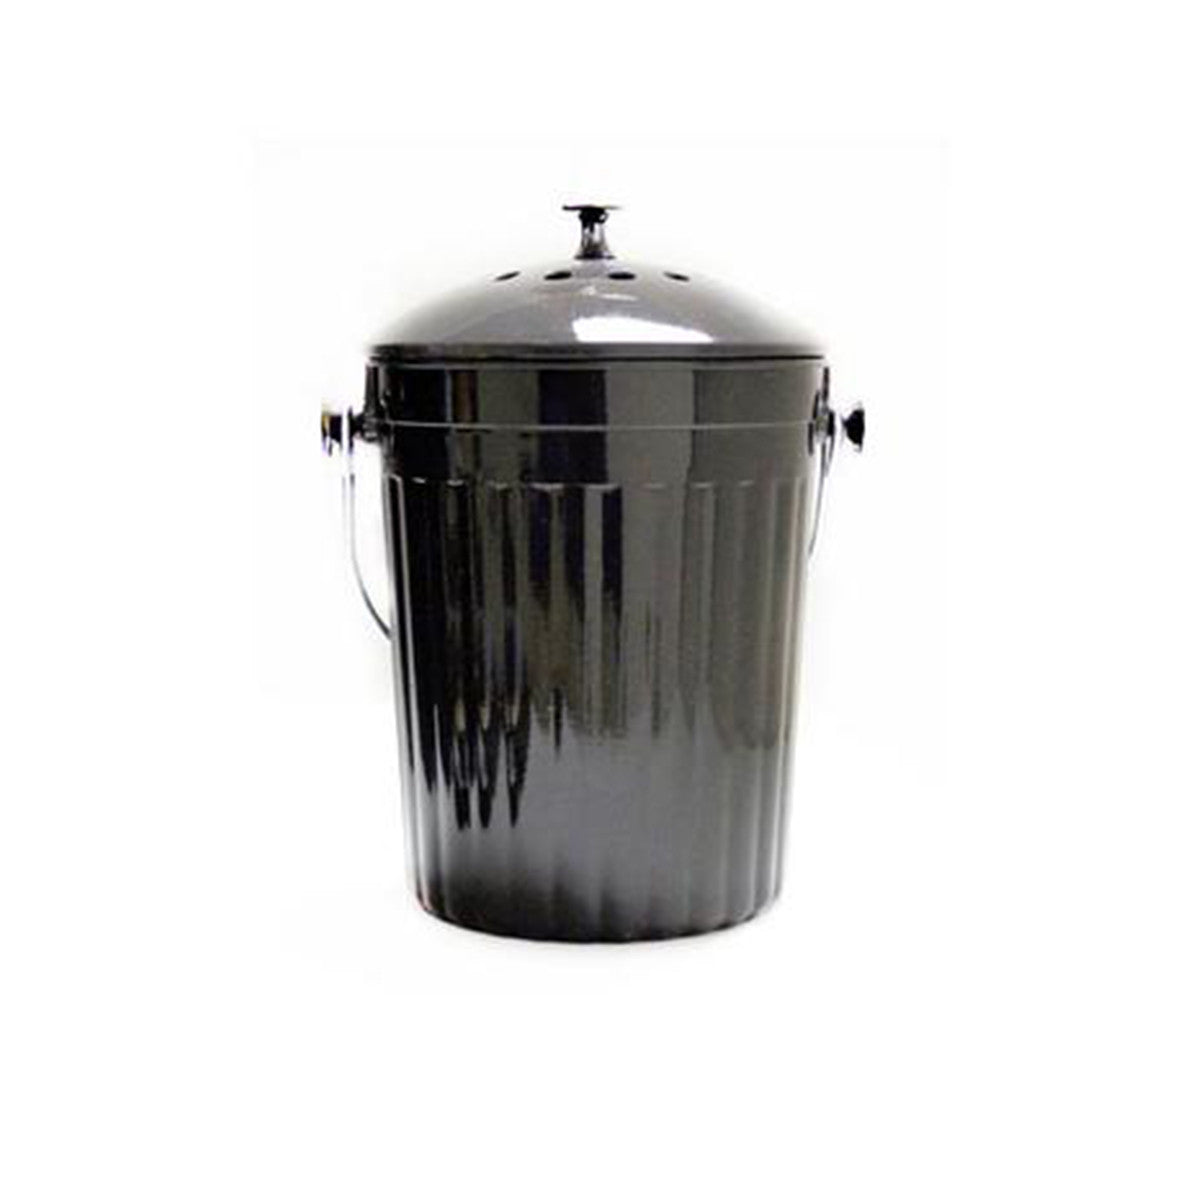 Wholesale compost bin countertop with charcoal filters-Venus